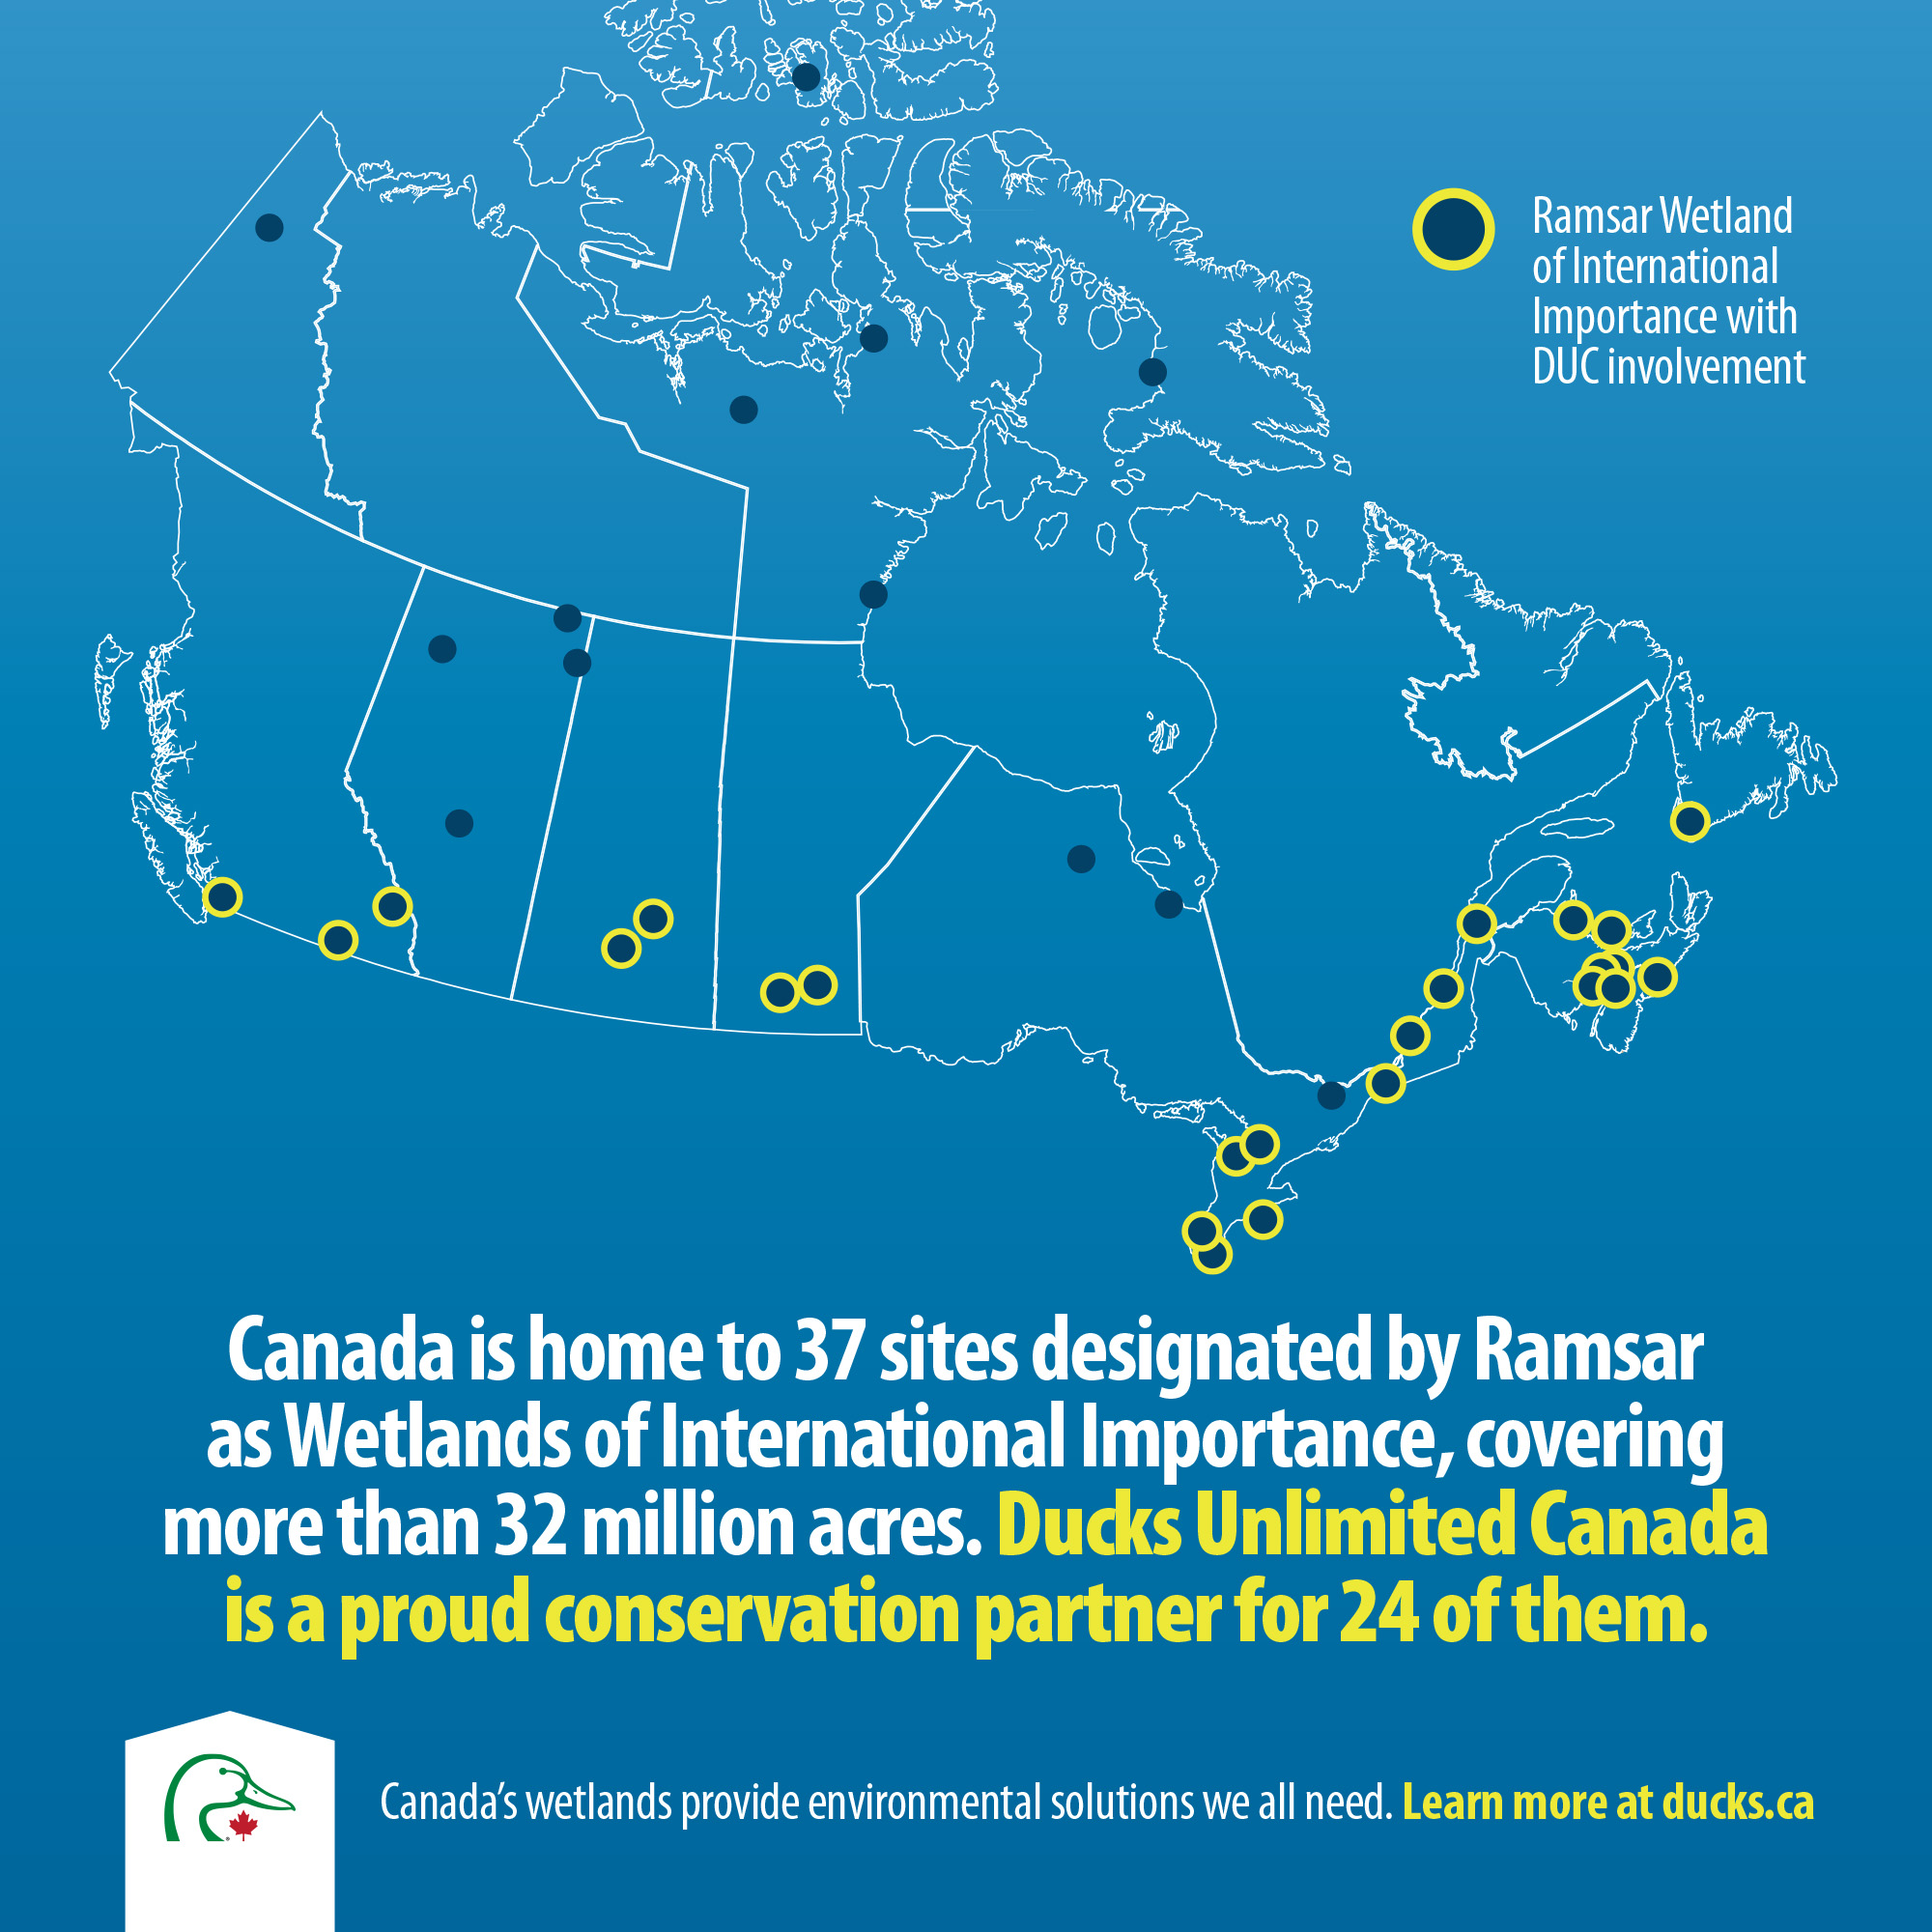 Canada is home to 37 sites designated by Ramsar as Wetlands of International Importance, covering more than 32 million acres. DUC proudly manages 24 (or 65%) of them.